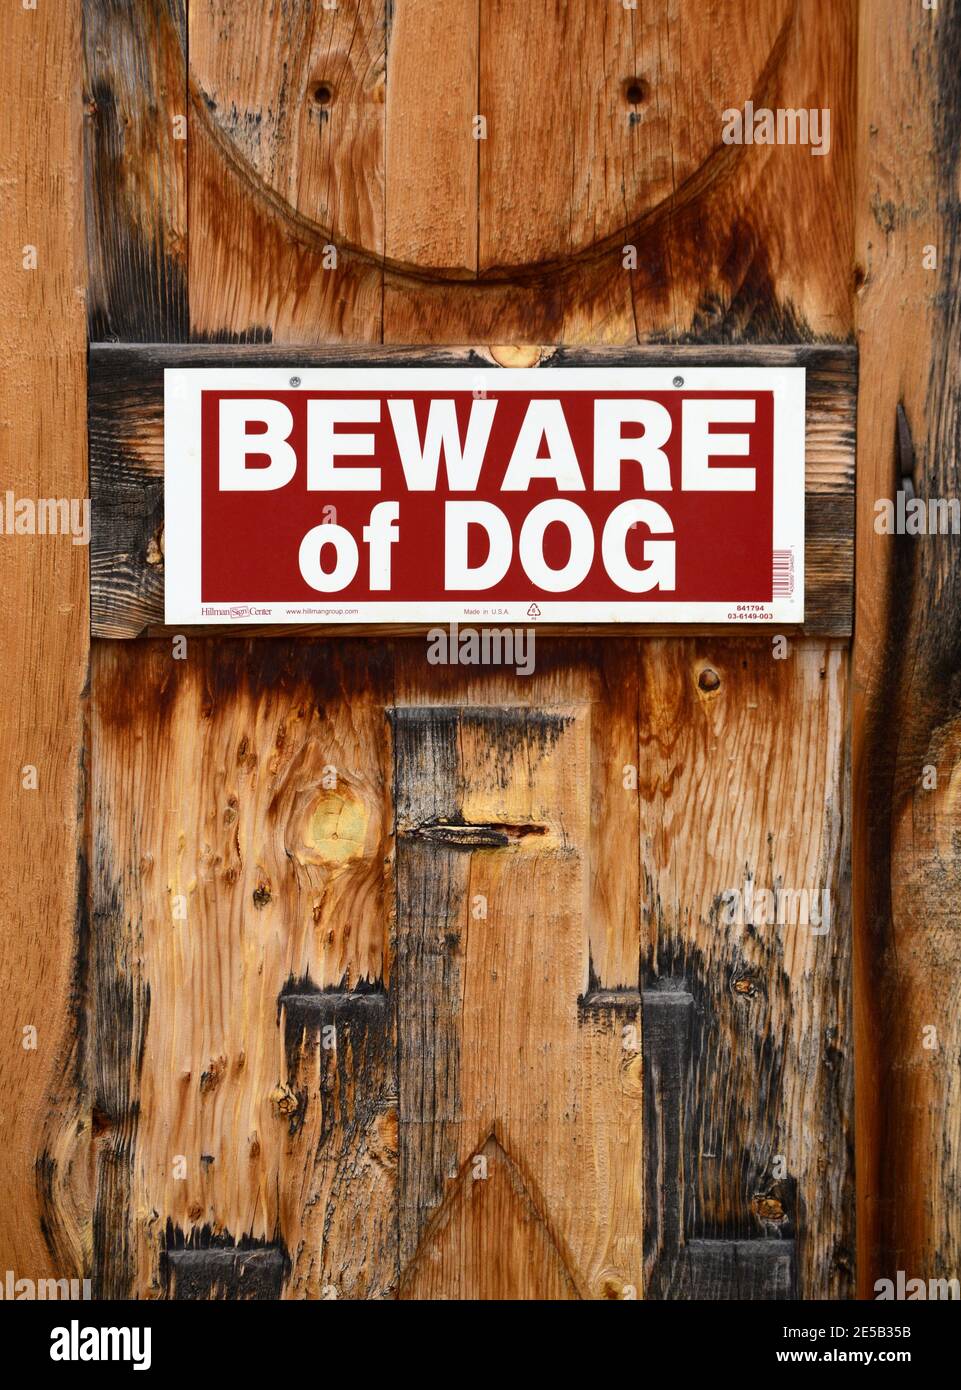 A Beware of Dog sign on a fence in Santa Fe, New Mexico. Stock Photo